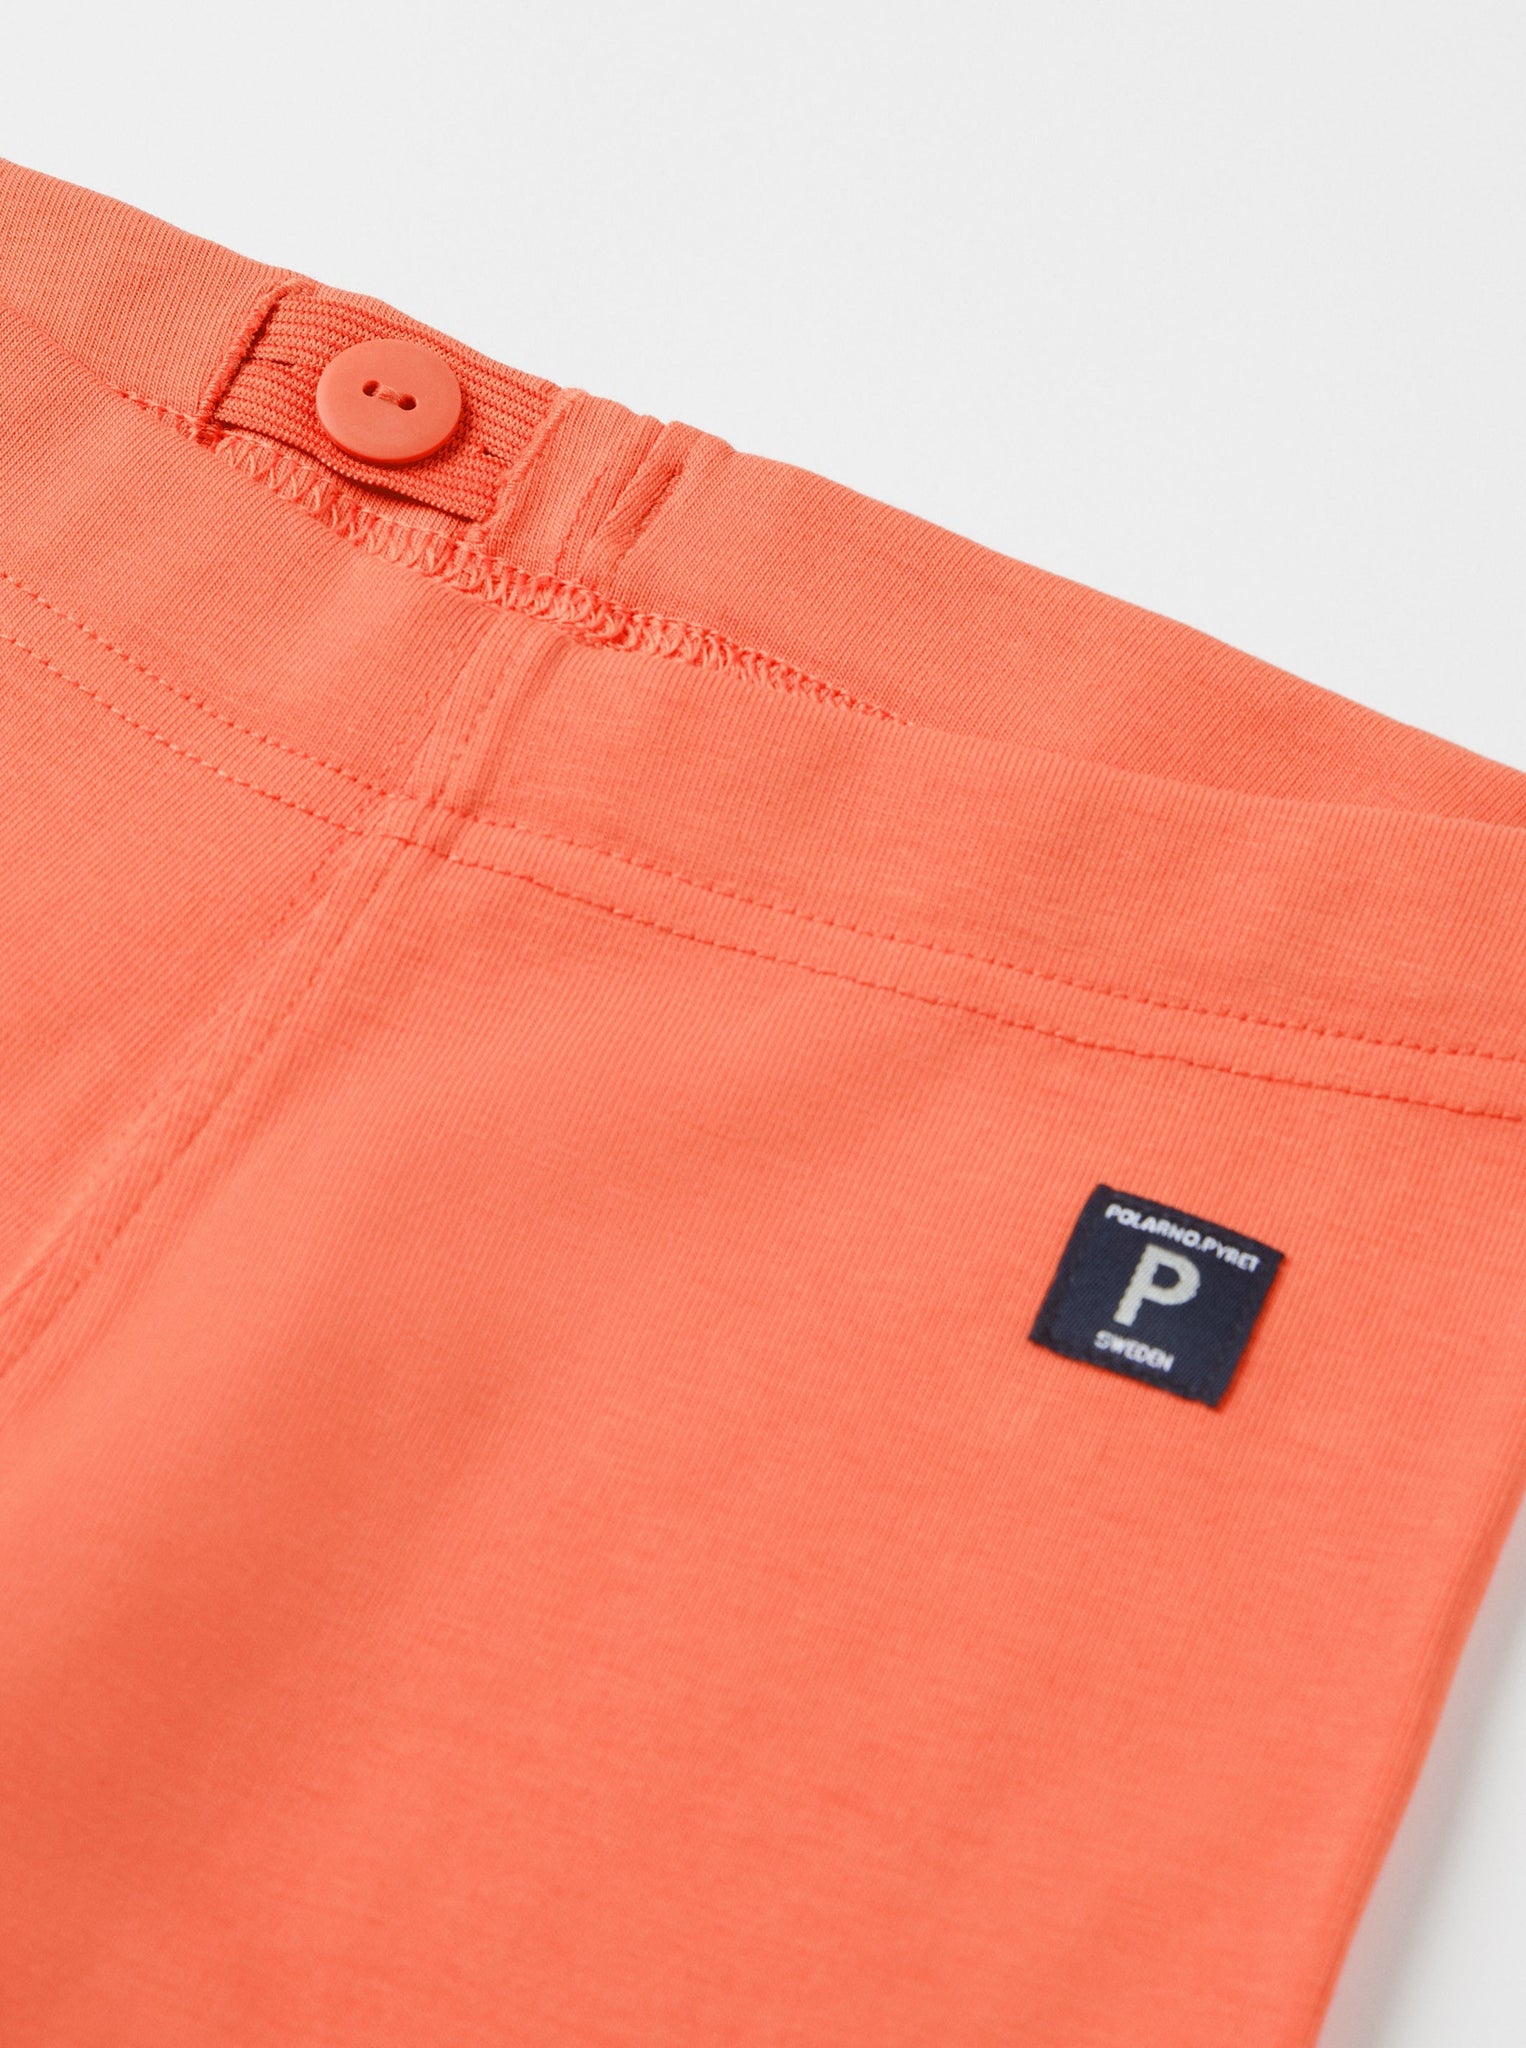 Organic Cotton Orange Kids Leggings from the Polarn O. Pyret kidswear collection. The best ethical kids clothes